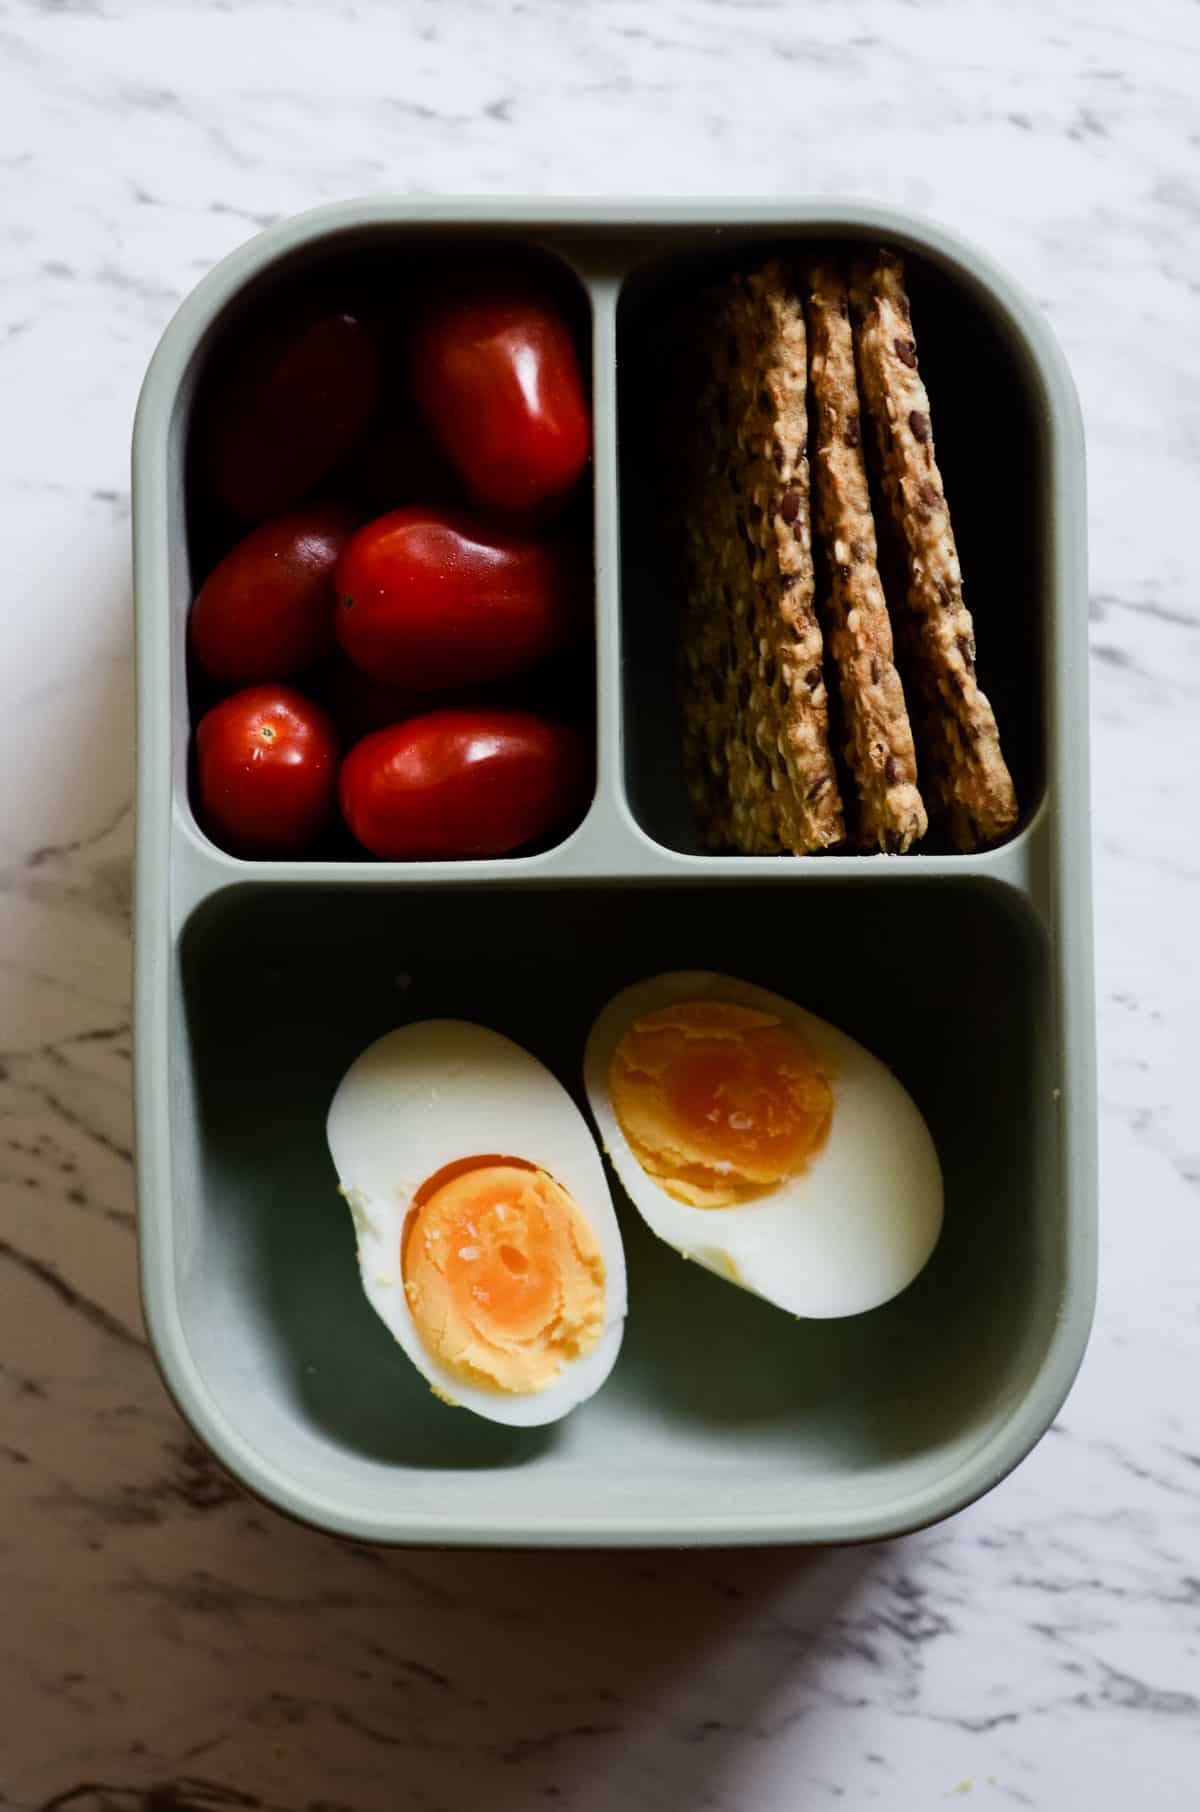 In a bento box style container, cherry tomatoes, seed crackers, and boiled eggs. 